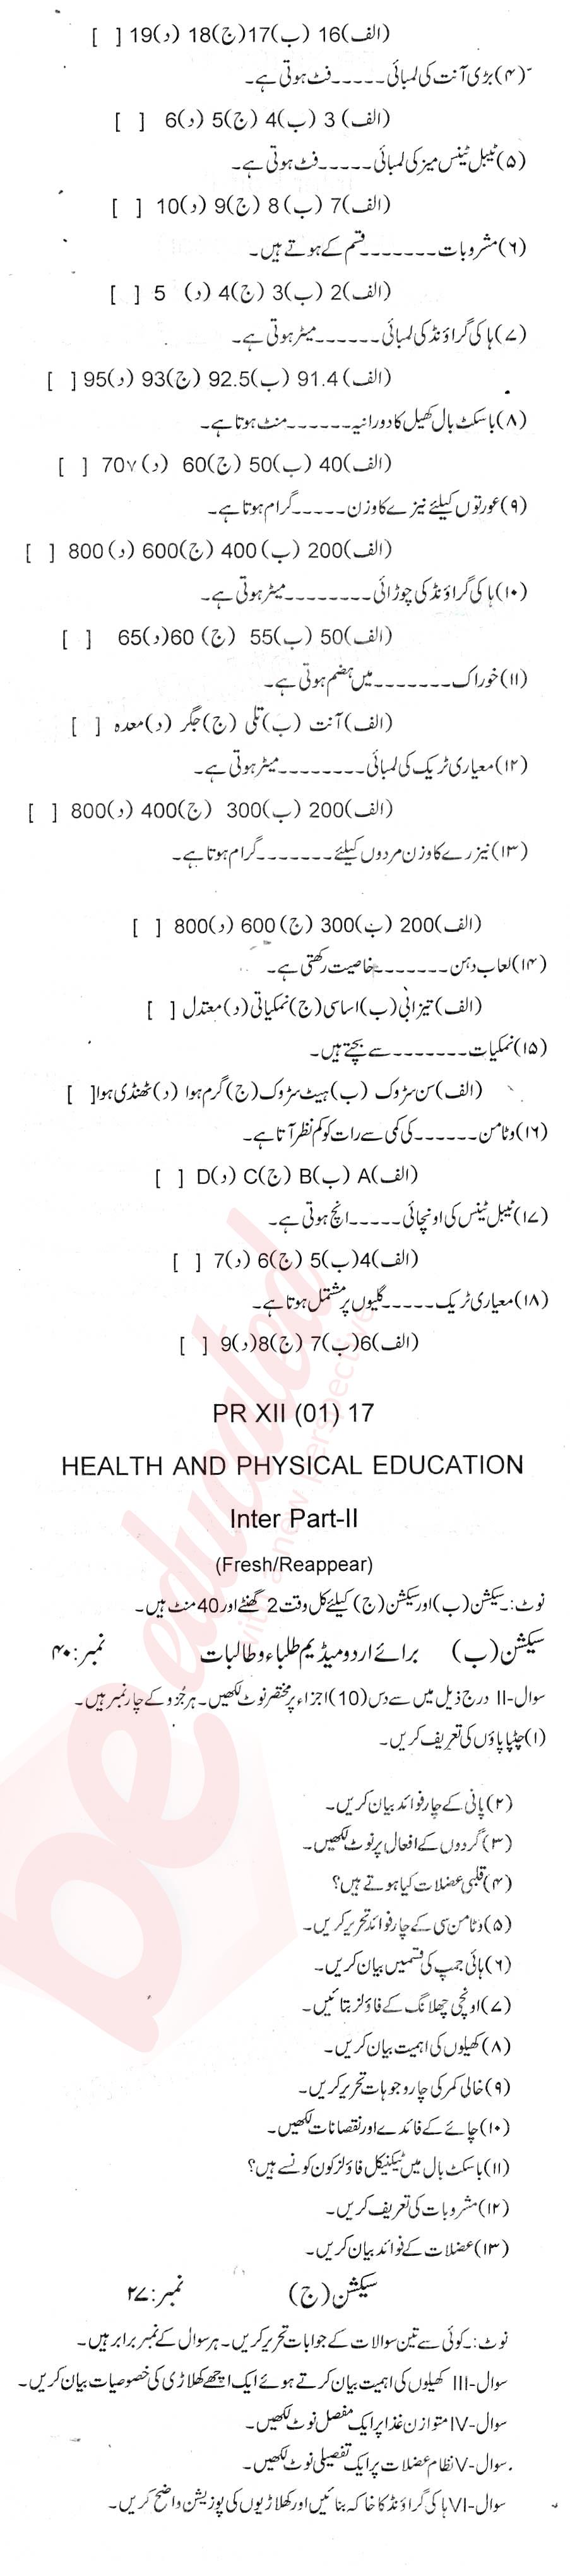 Health and Physical Education FA Part 2 Past Paper Group 1 BISE Swat 2017